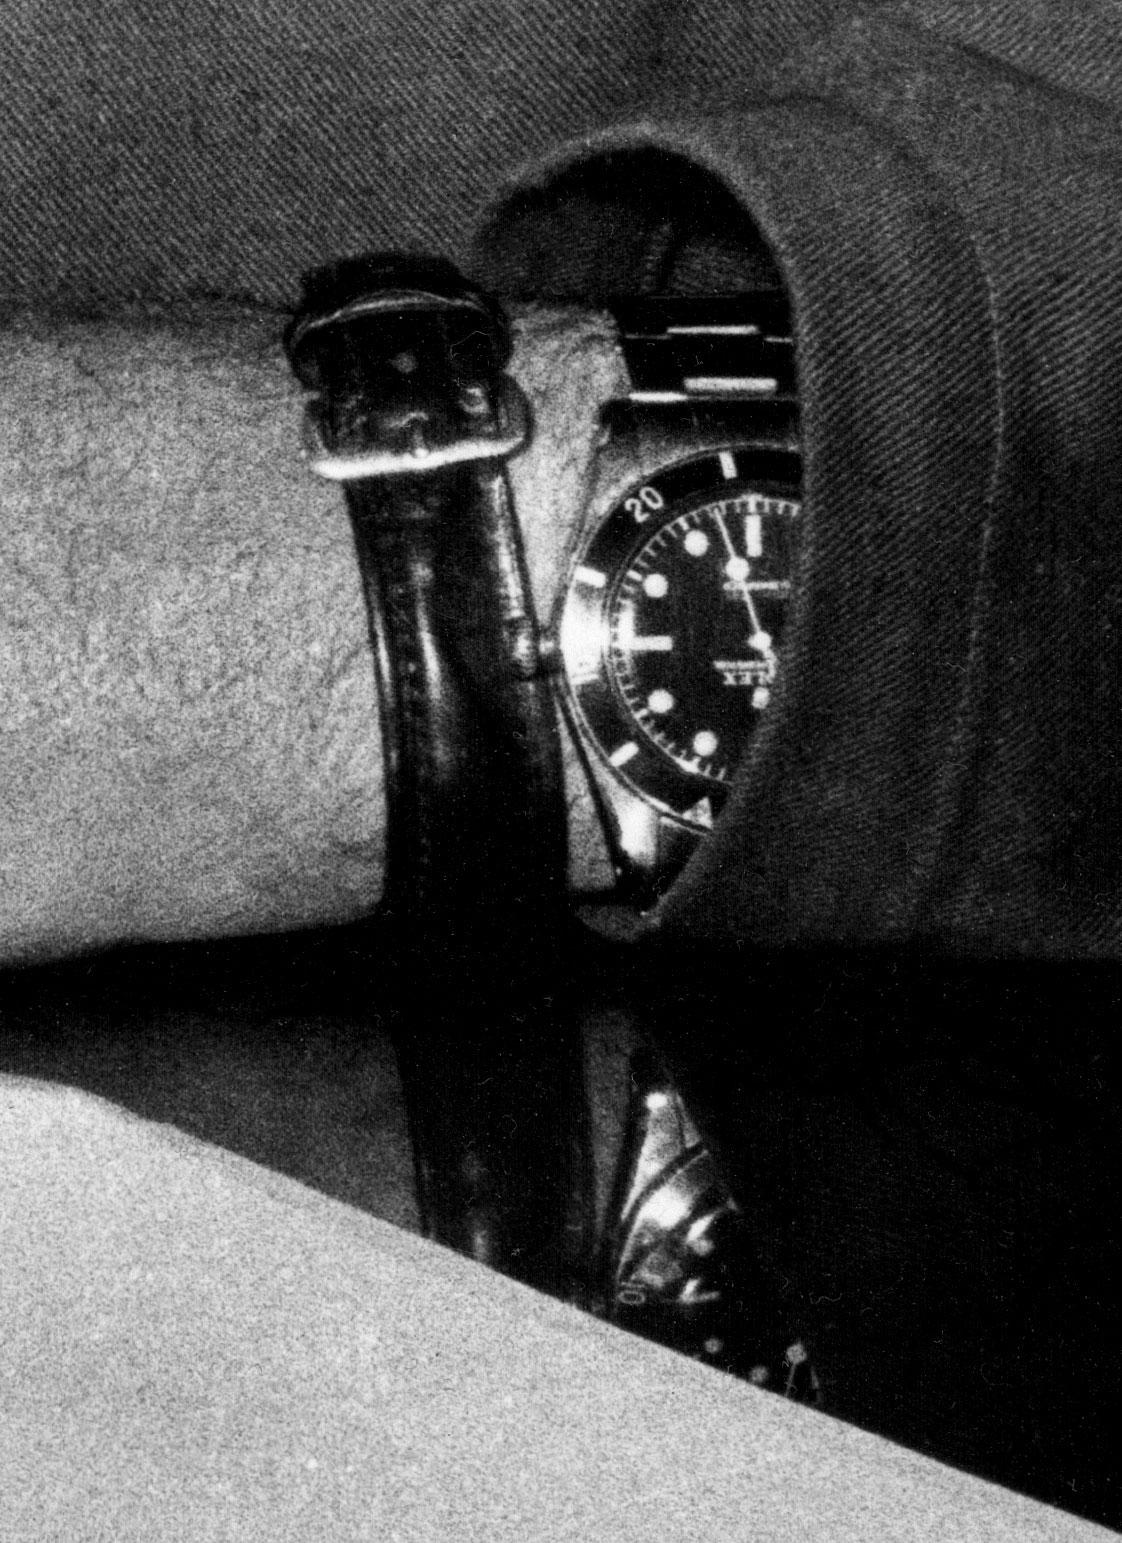 Rolex Submariner, as worn by Che Guevara! Meanwhile, Fidel Castro